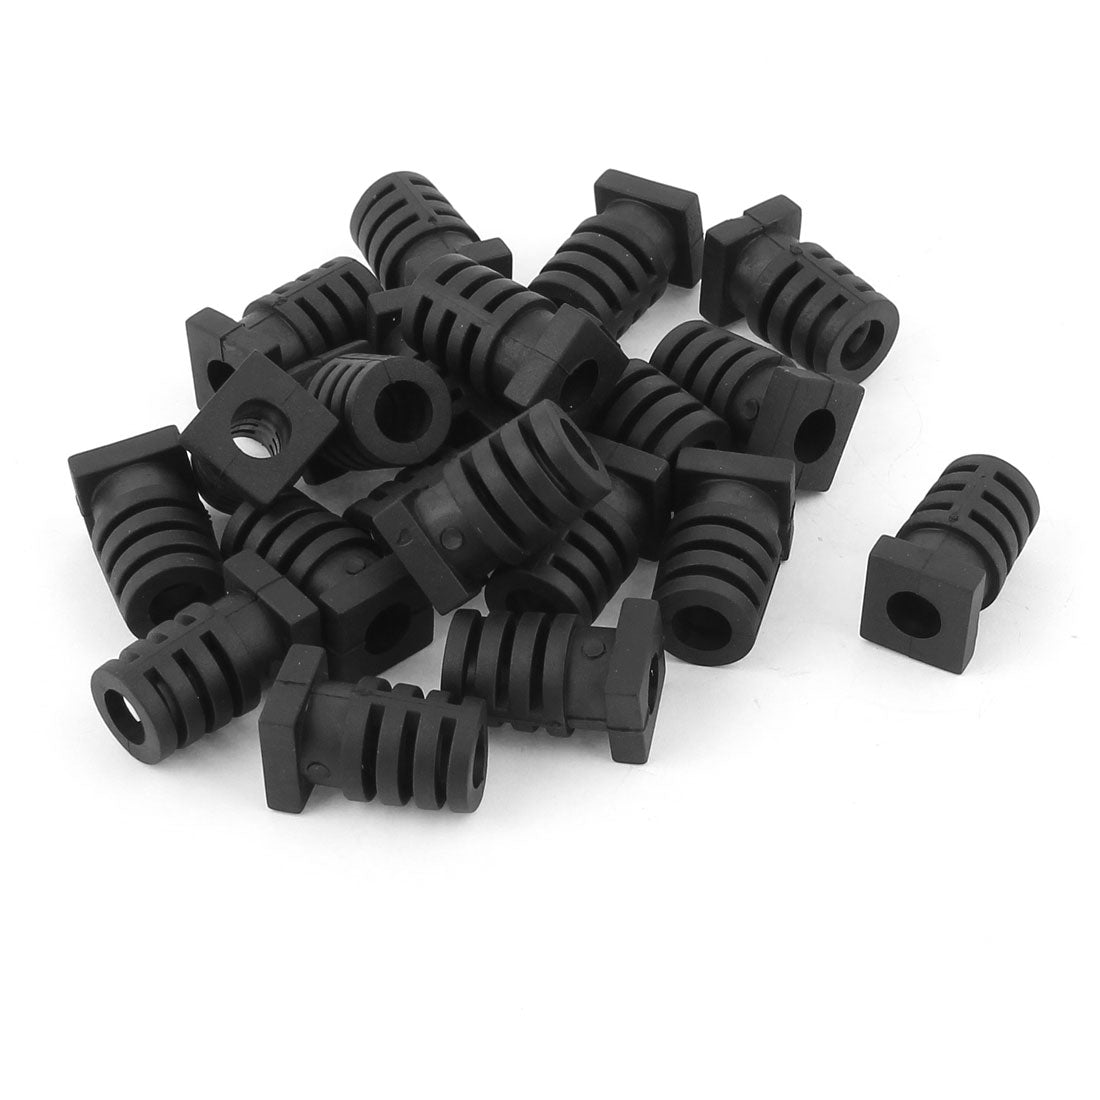 uxcell Uxcell 20pcs 20x10x6mm Mini Rubber Strain Relief Cord Boot Protector Cable Sleeve Hose for Power Tool